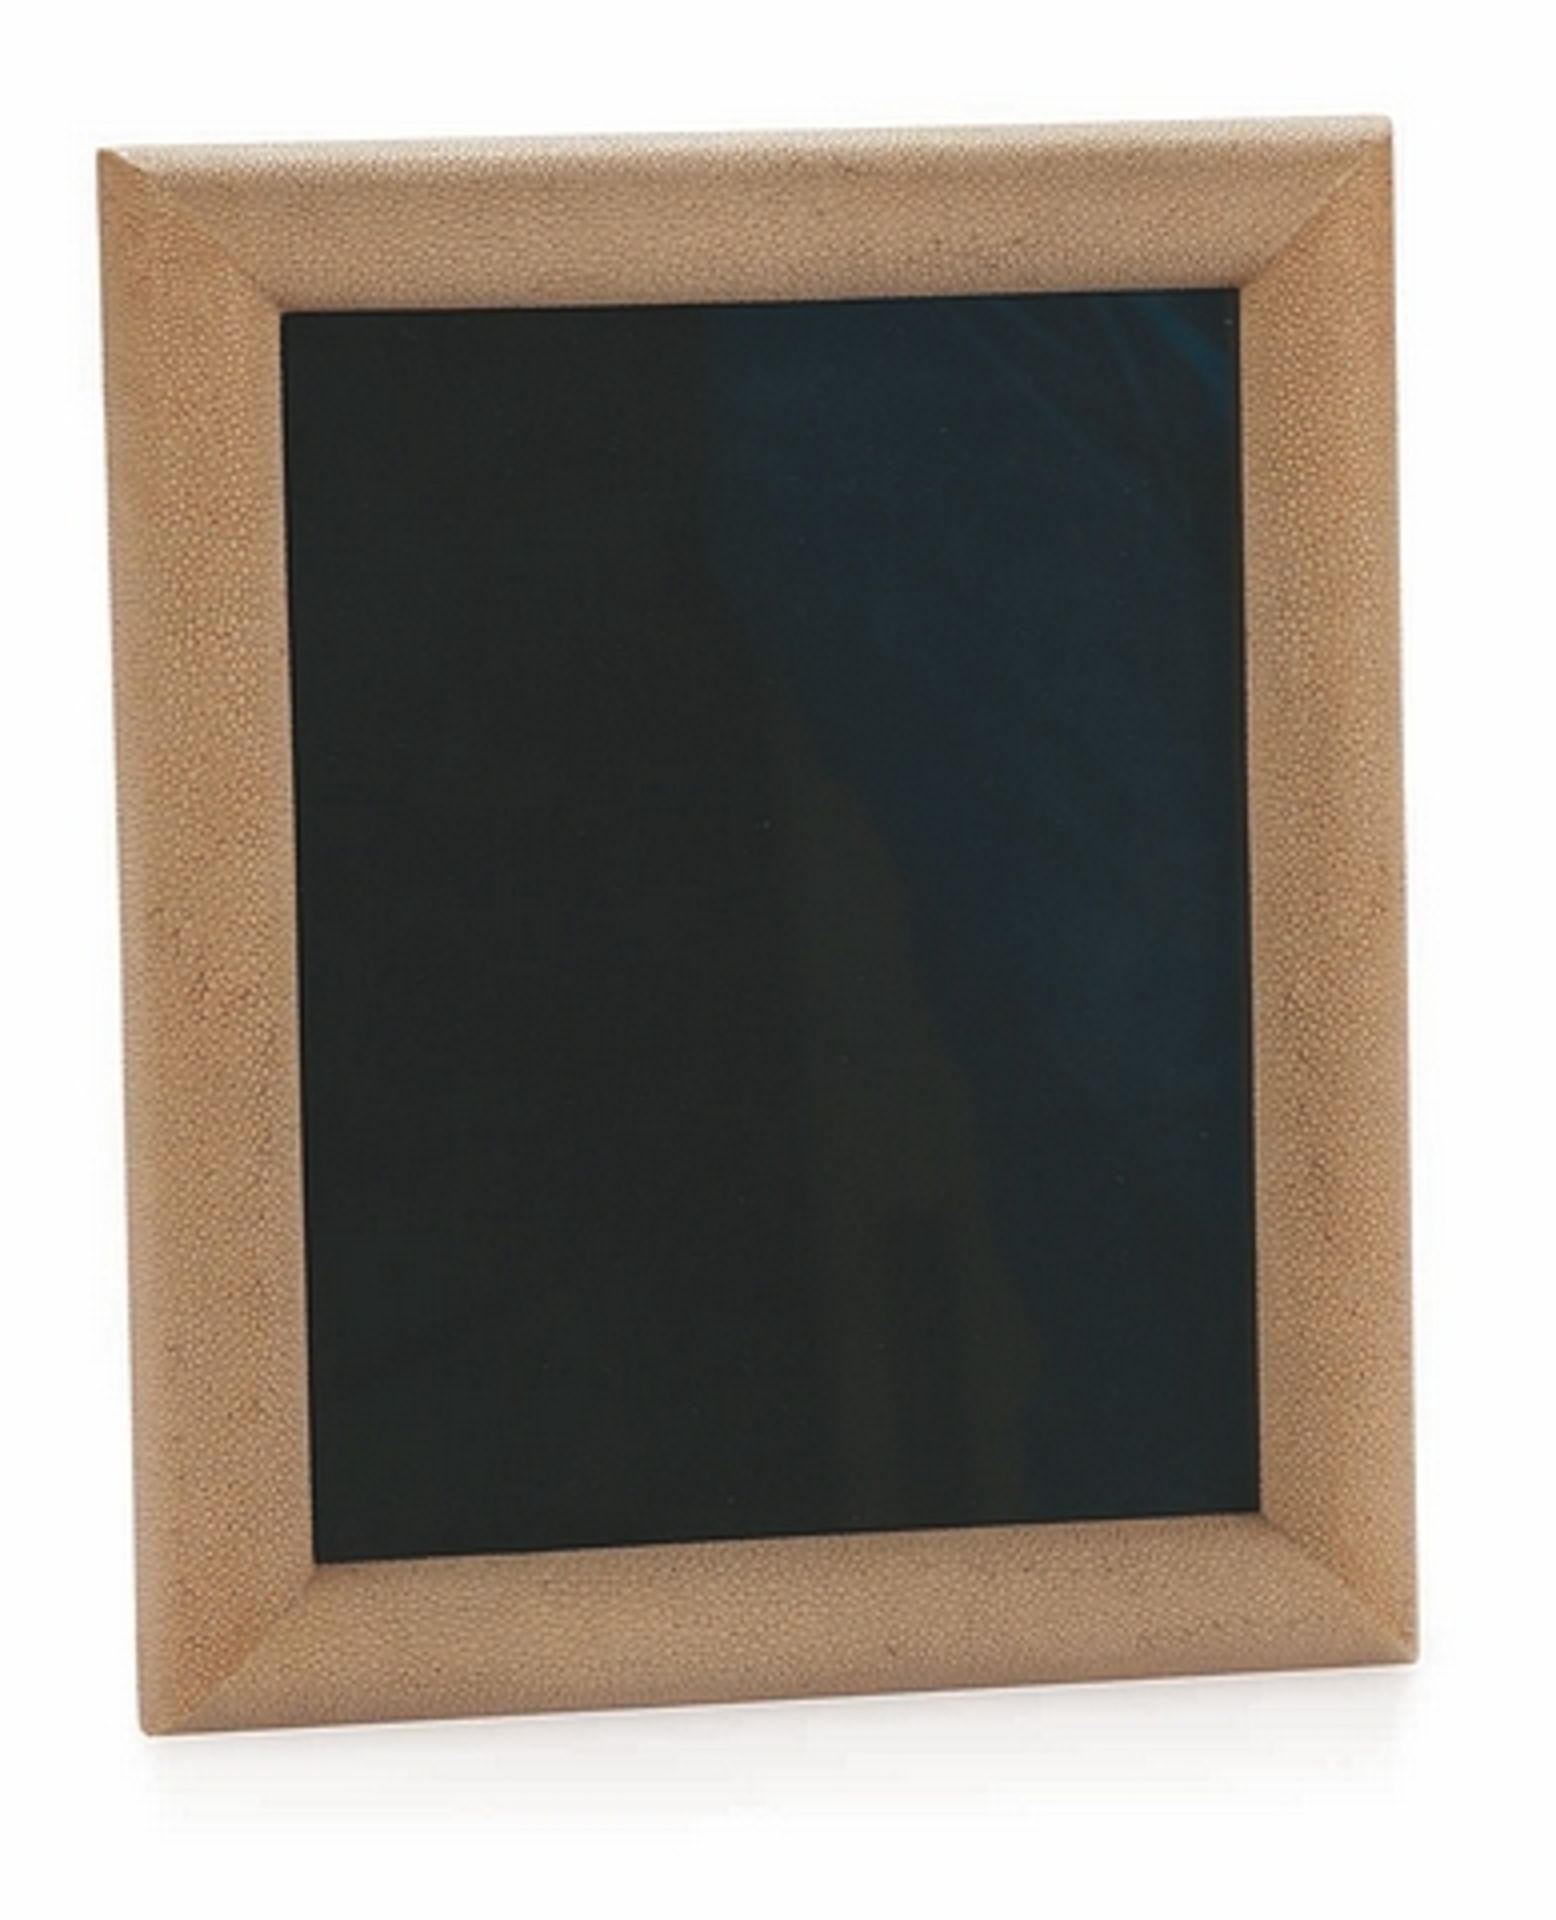 Picture frame fret antique large antique stingray. keeping your memories in view, everyone loves